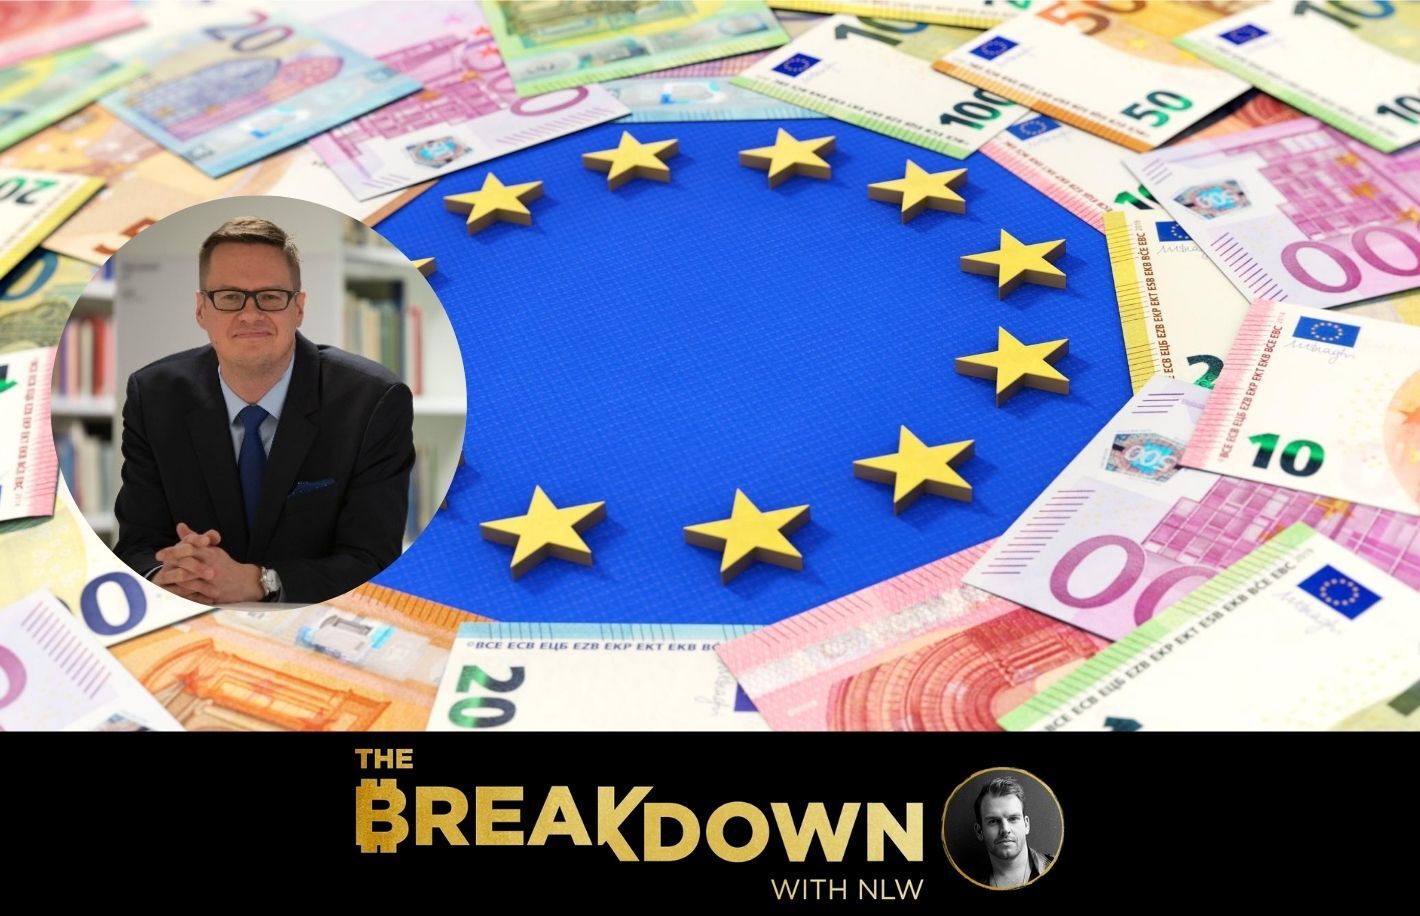 Could-the-european-recovery-plan-actually-break-europe-apart?